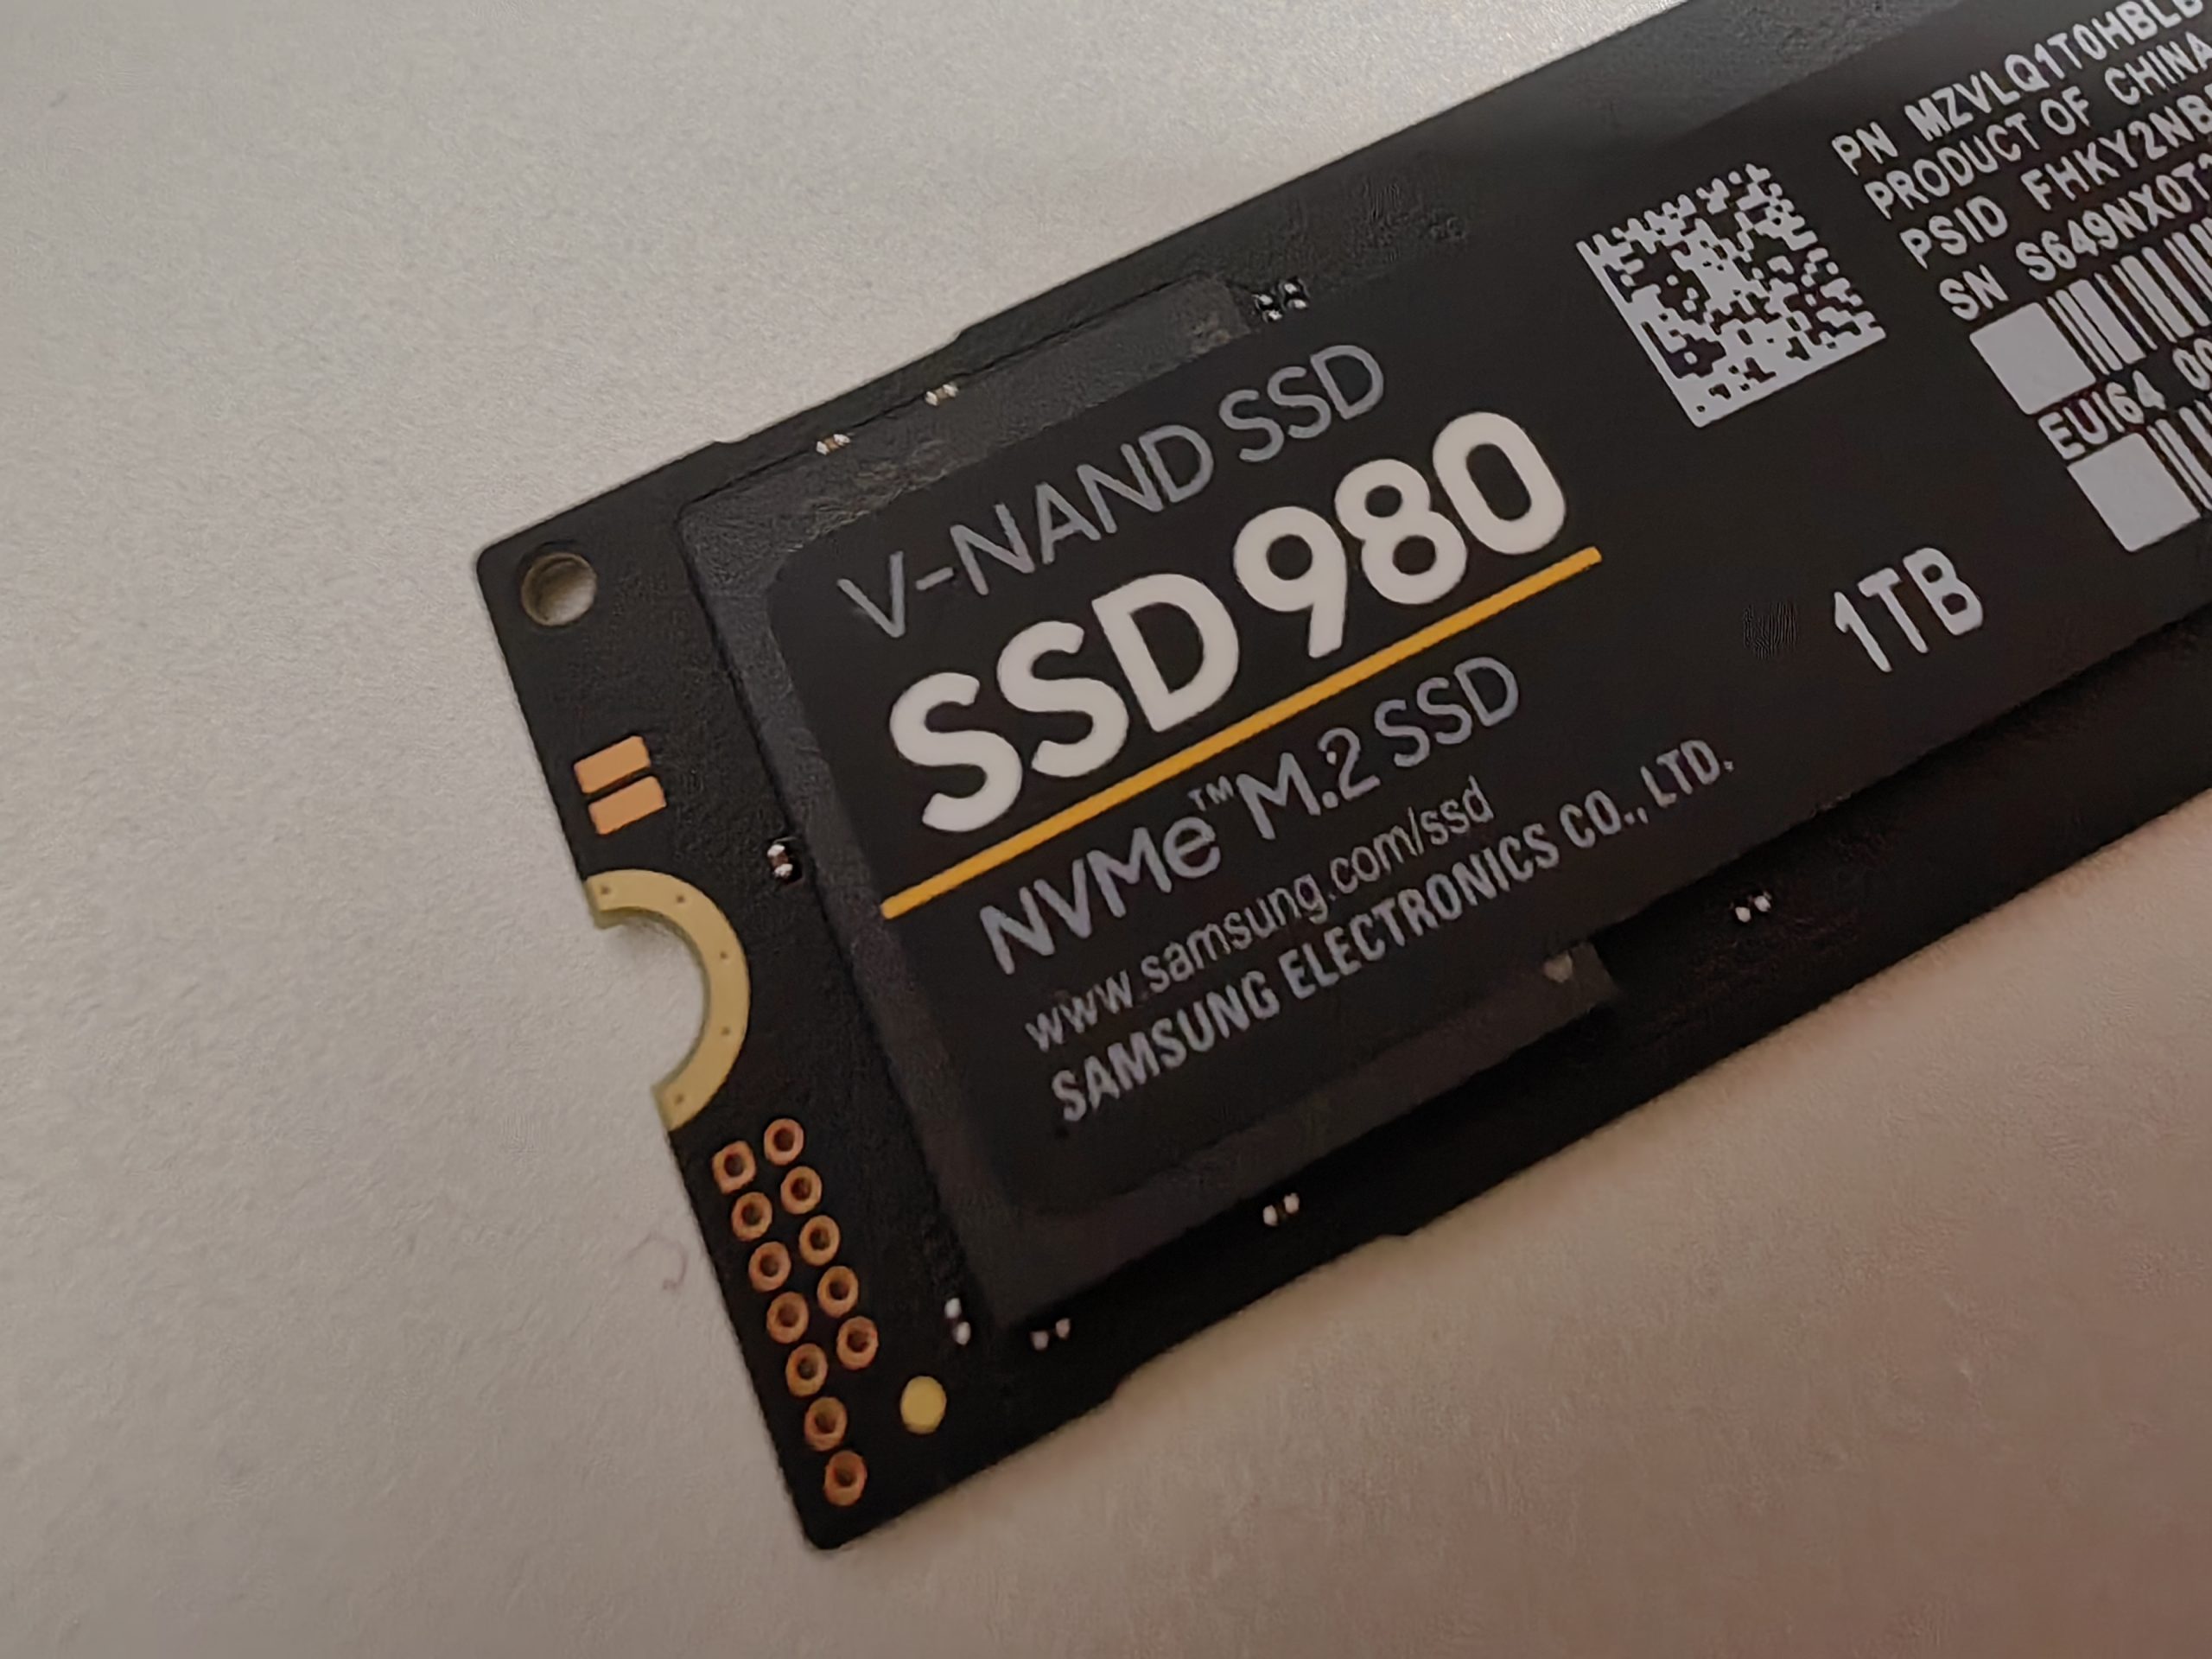  Samsung-980-SSD-disk-test-review-15